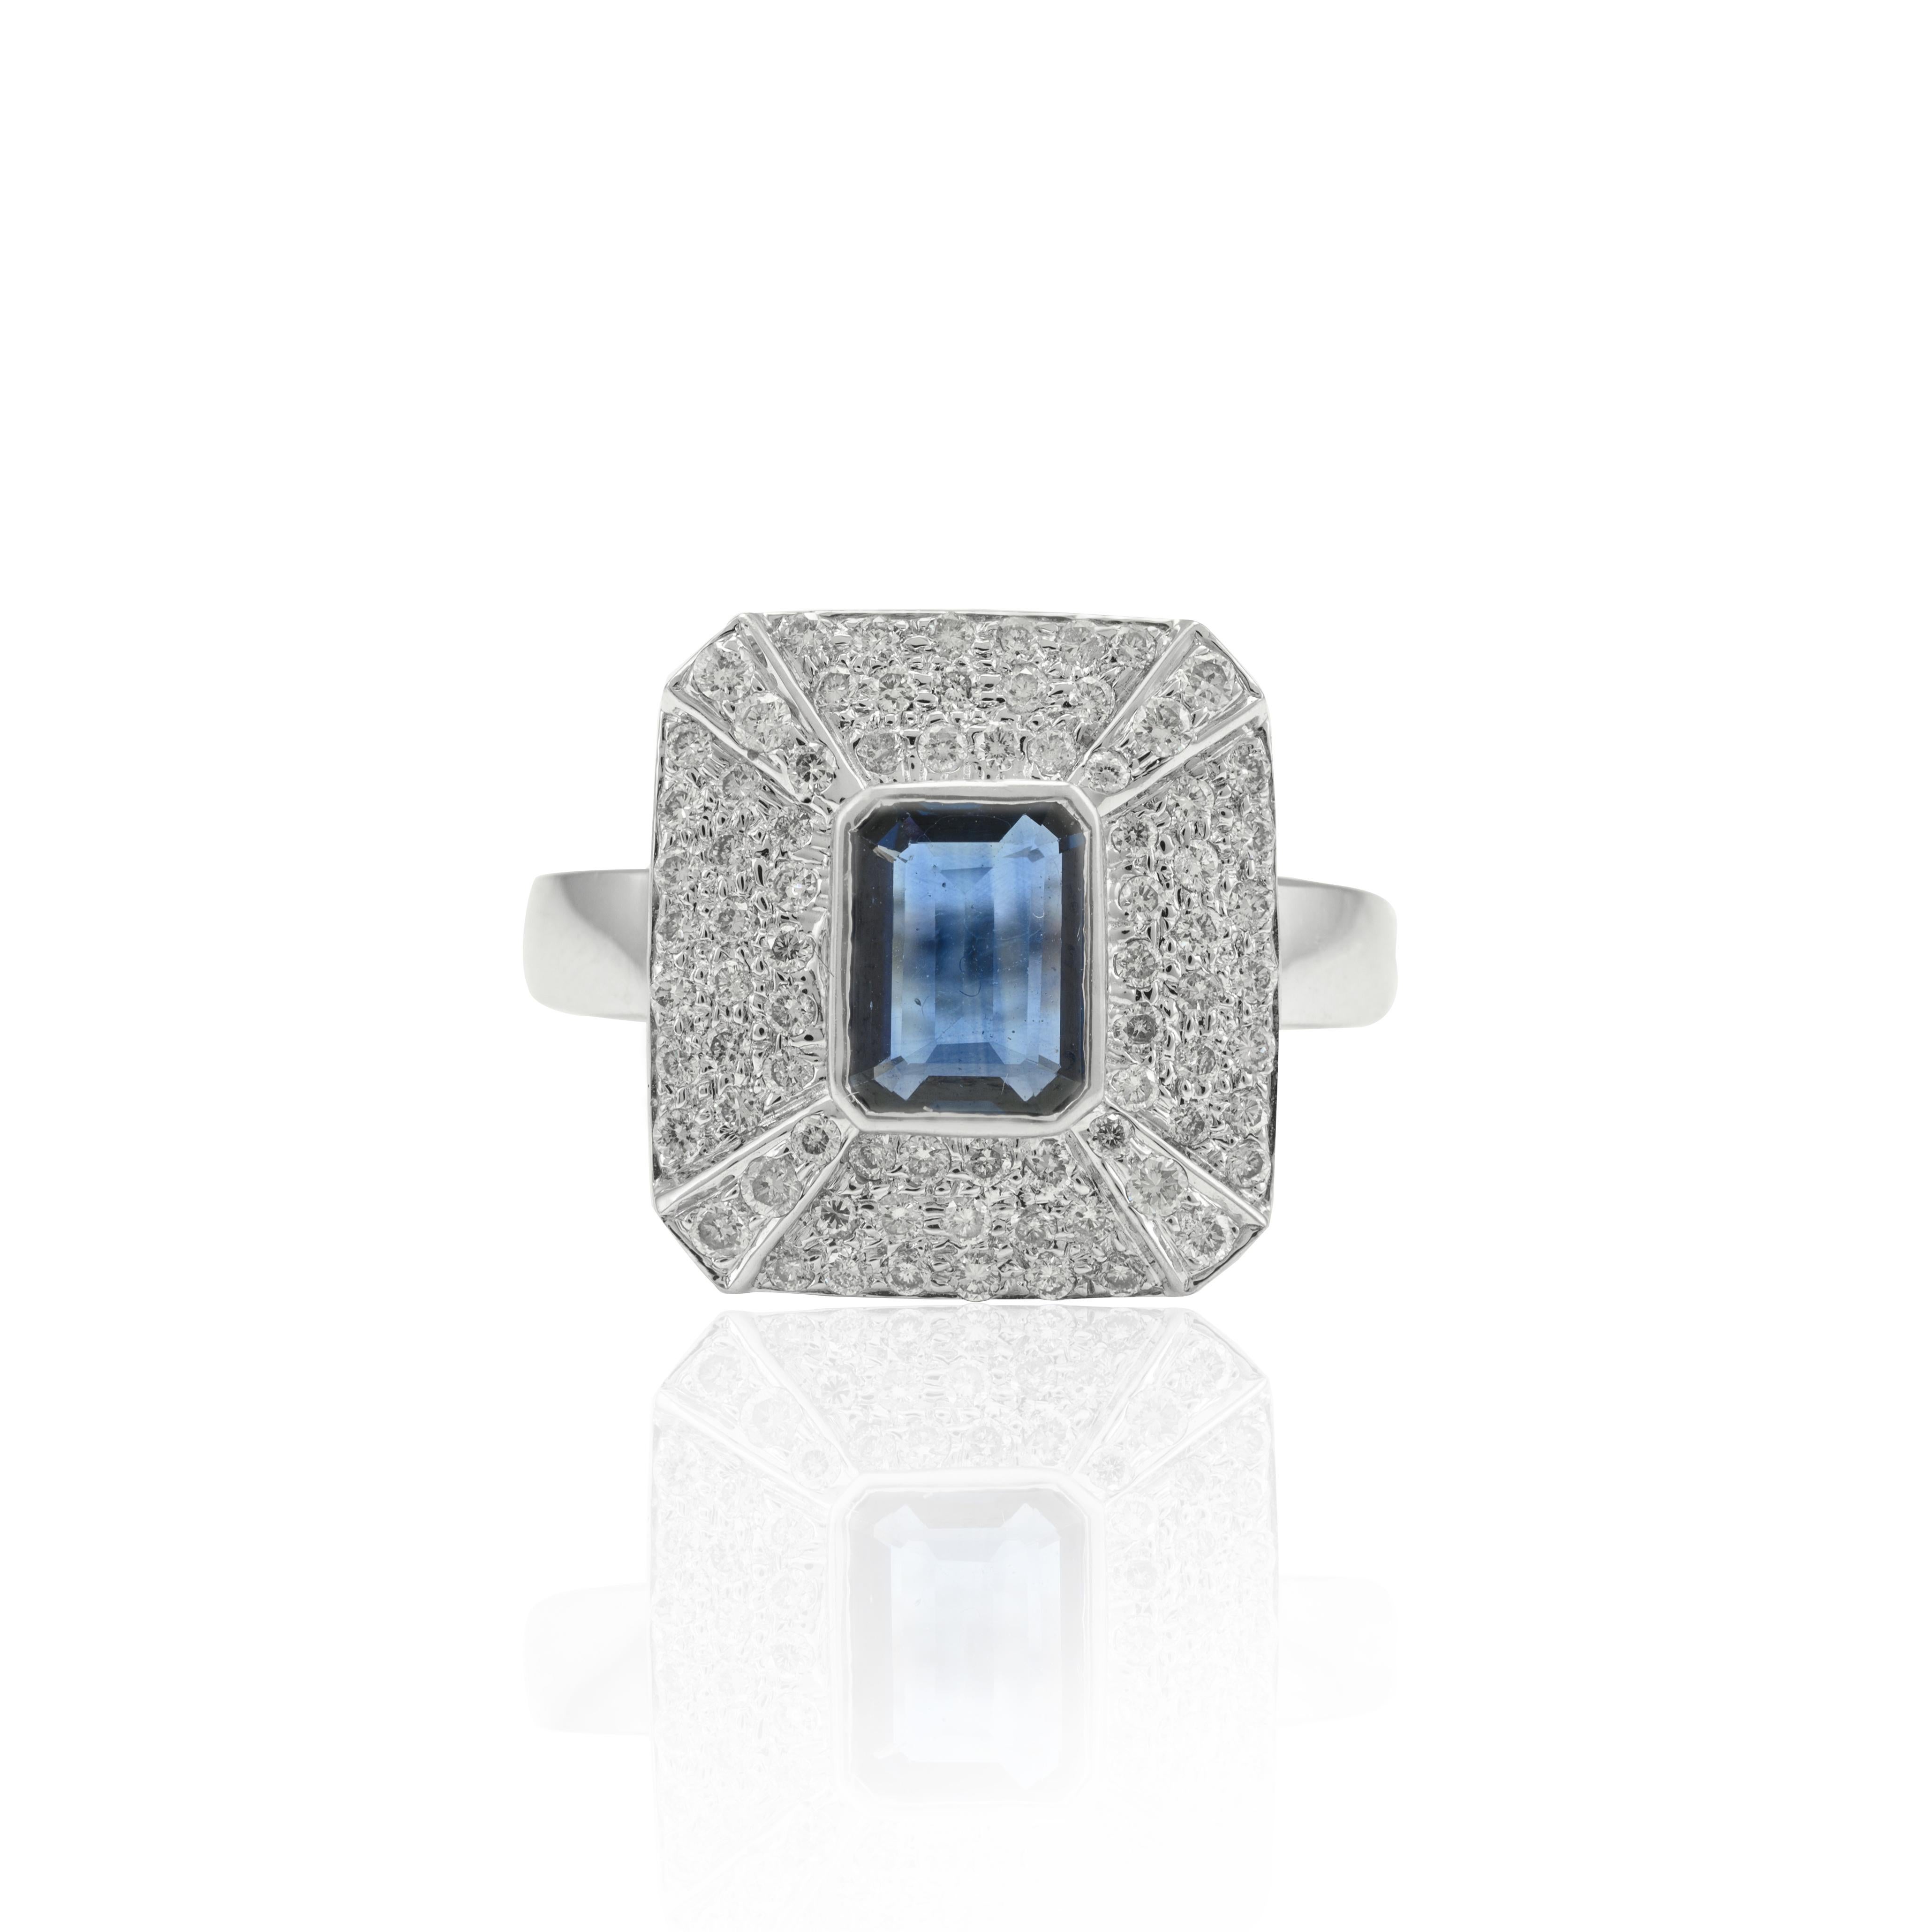 For Sale:  Exquisite Diamond and Emerald Cut Blue Sapphire Ring in 18k Solid White Gold 7